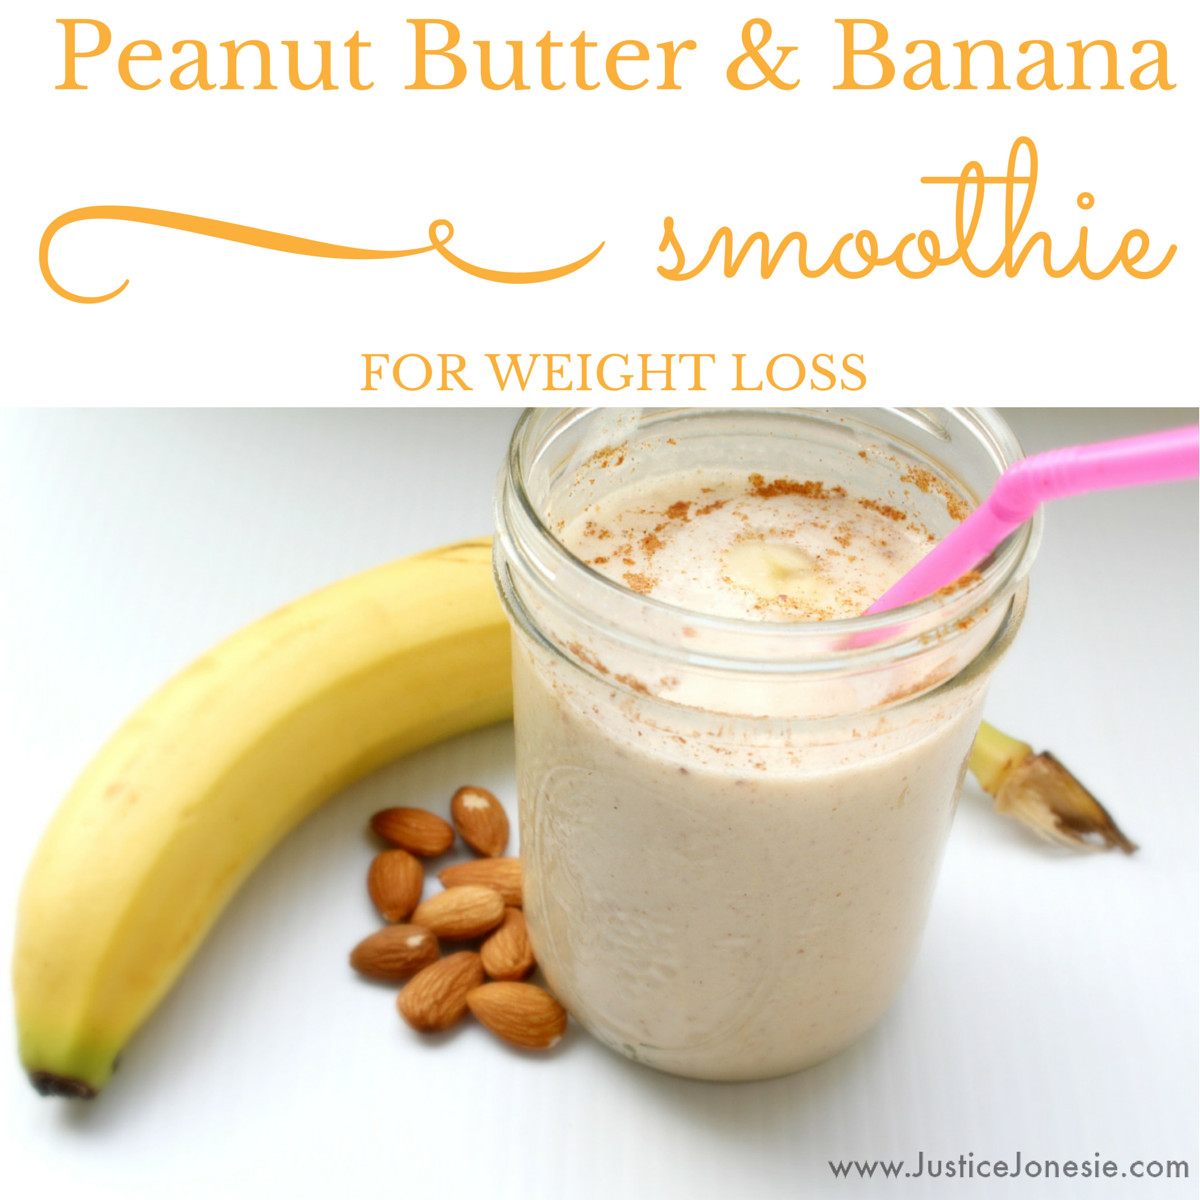 Easy Healthy Smoothies For Weight Loss
 Easy Peanut Butter And Banana Smoothie for Weight Loss